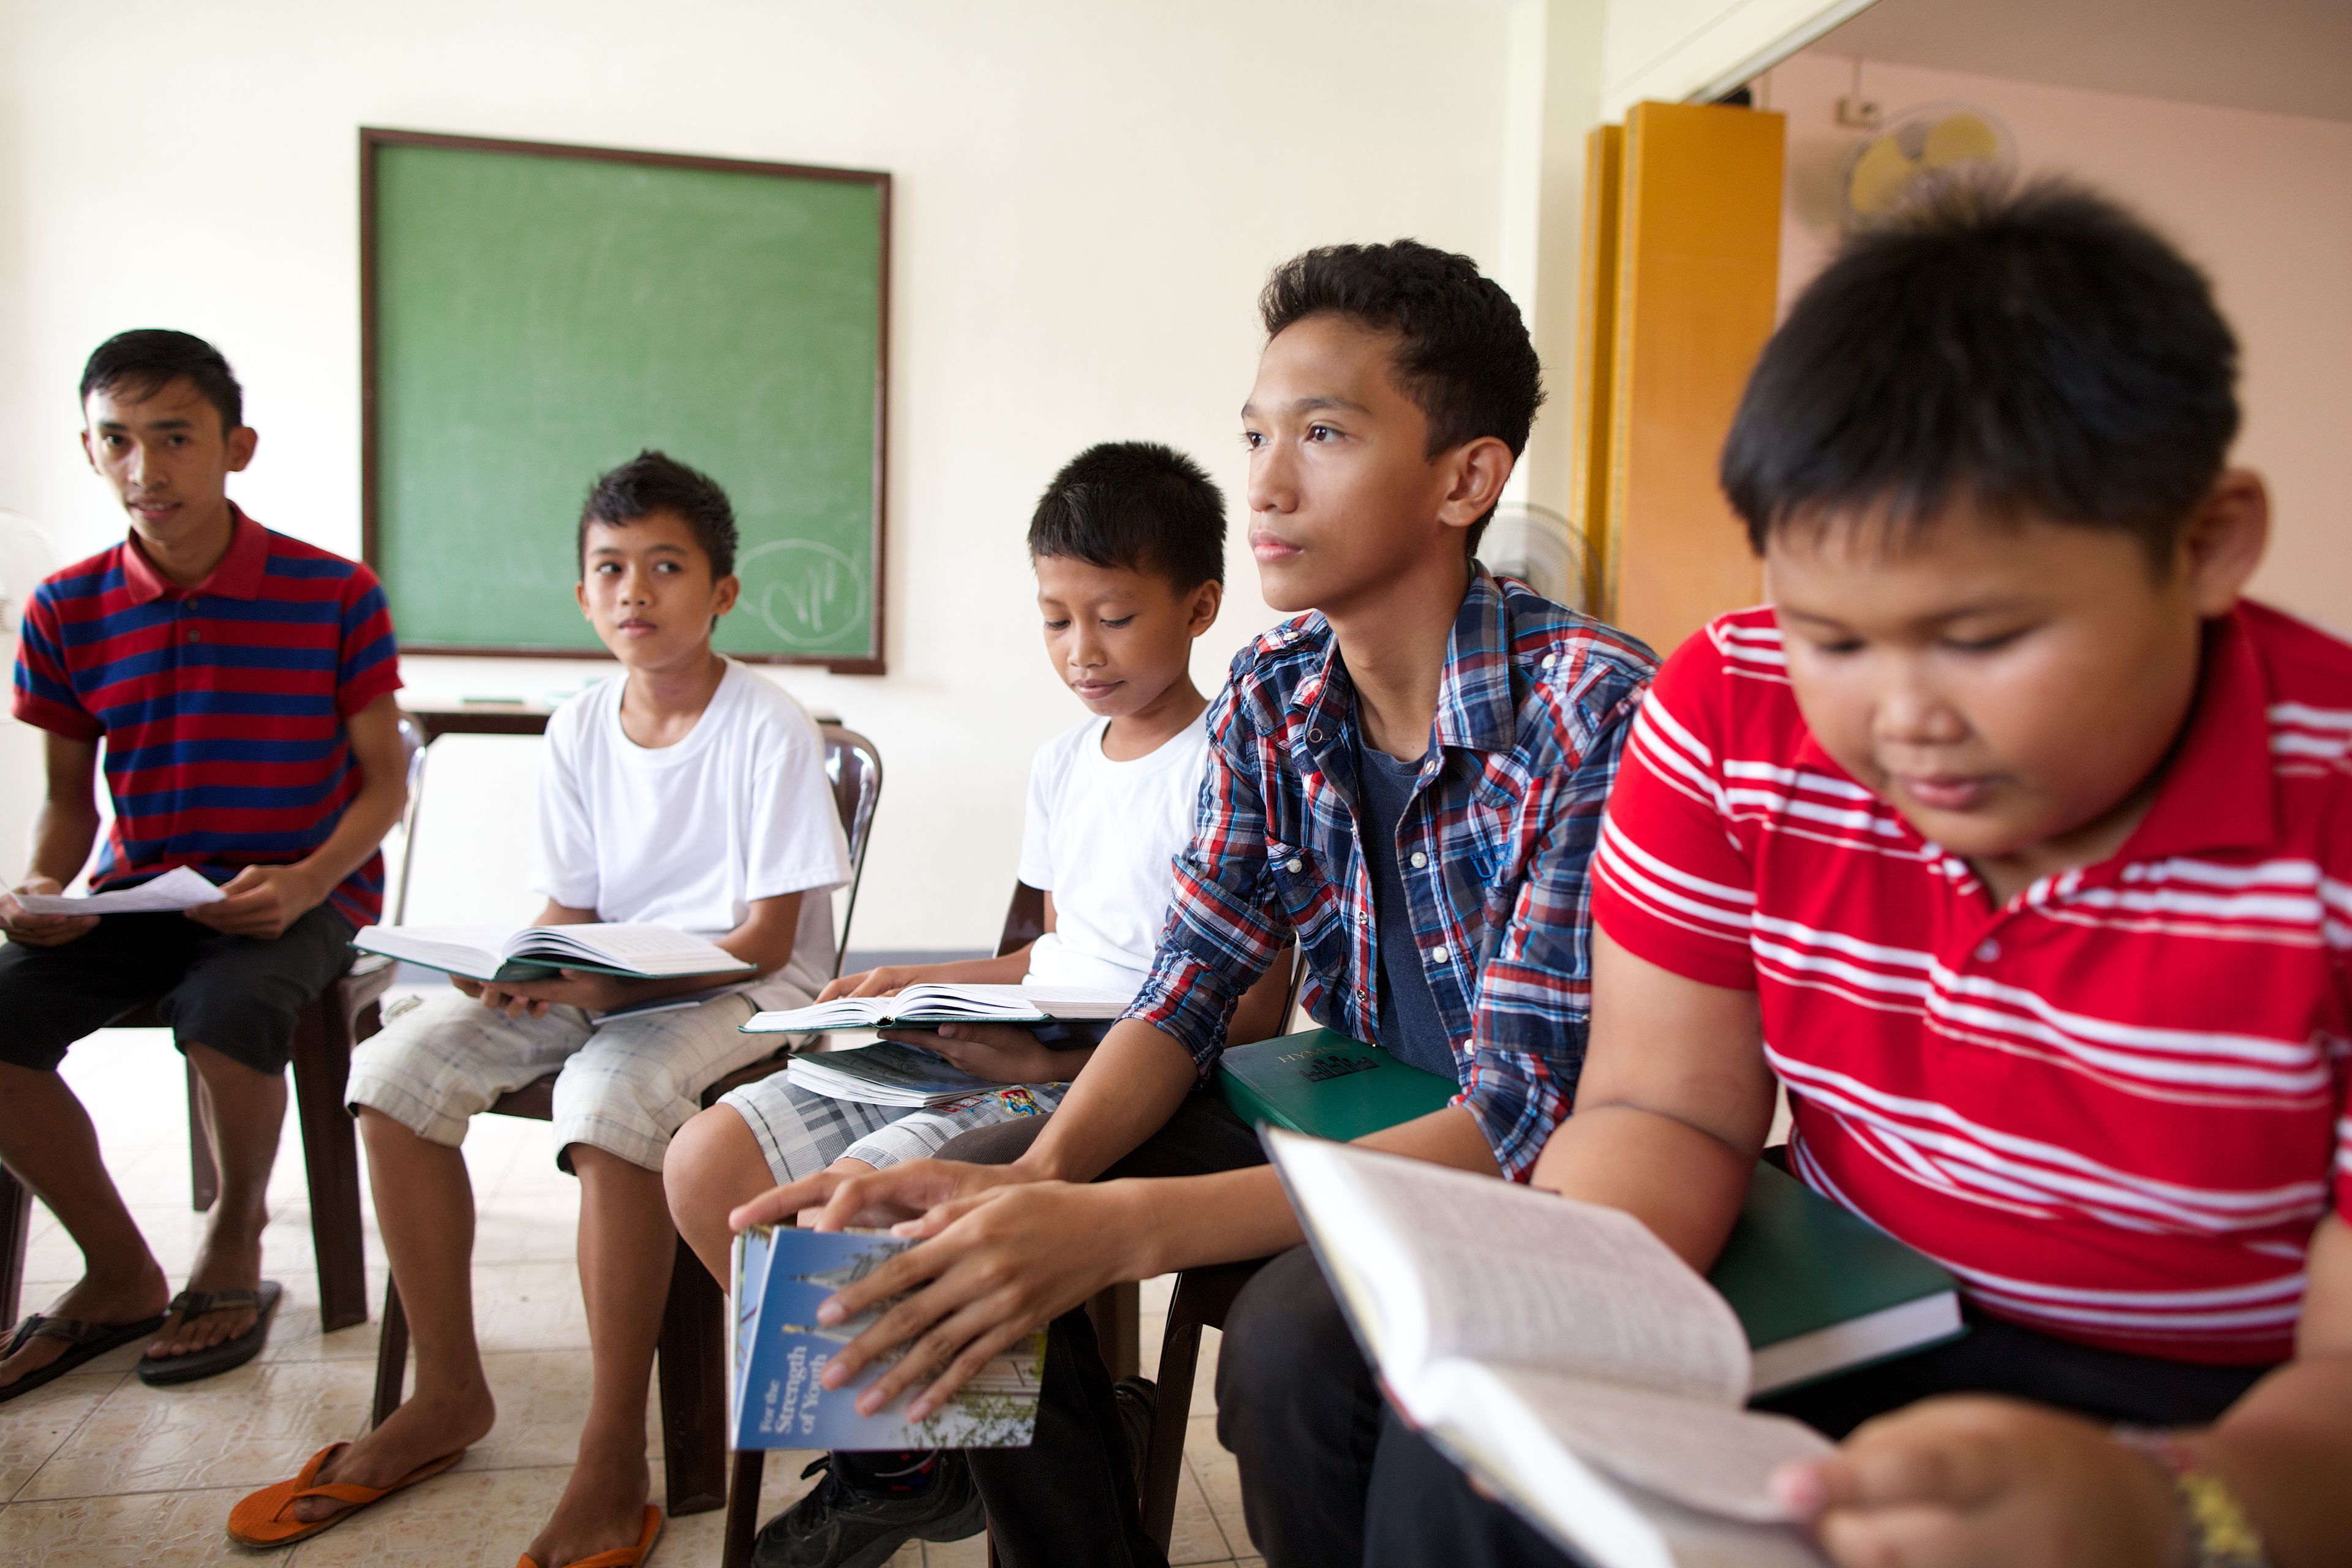 A group of young men from the Philippines sitting in a classroom at church and reading Church materials.